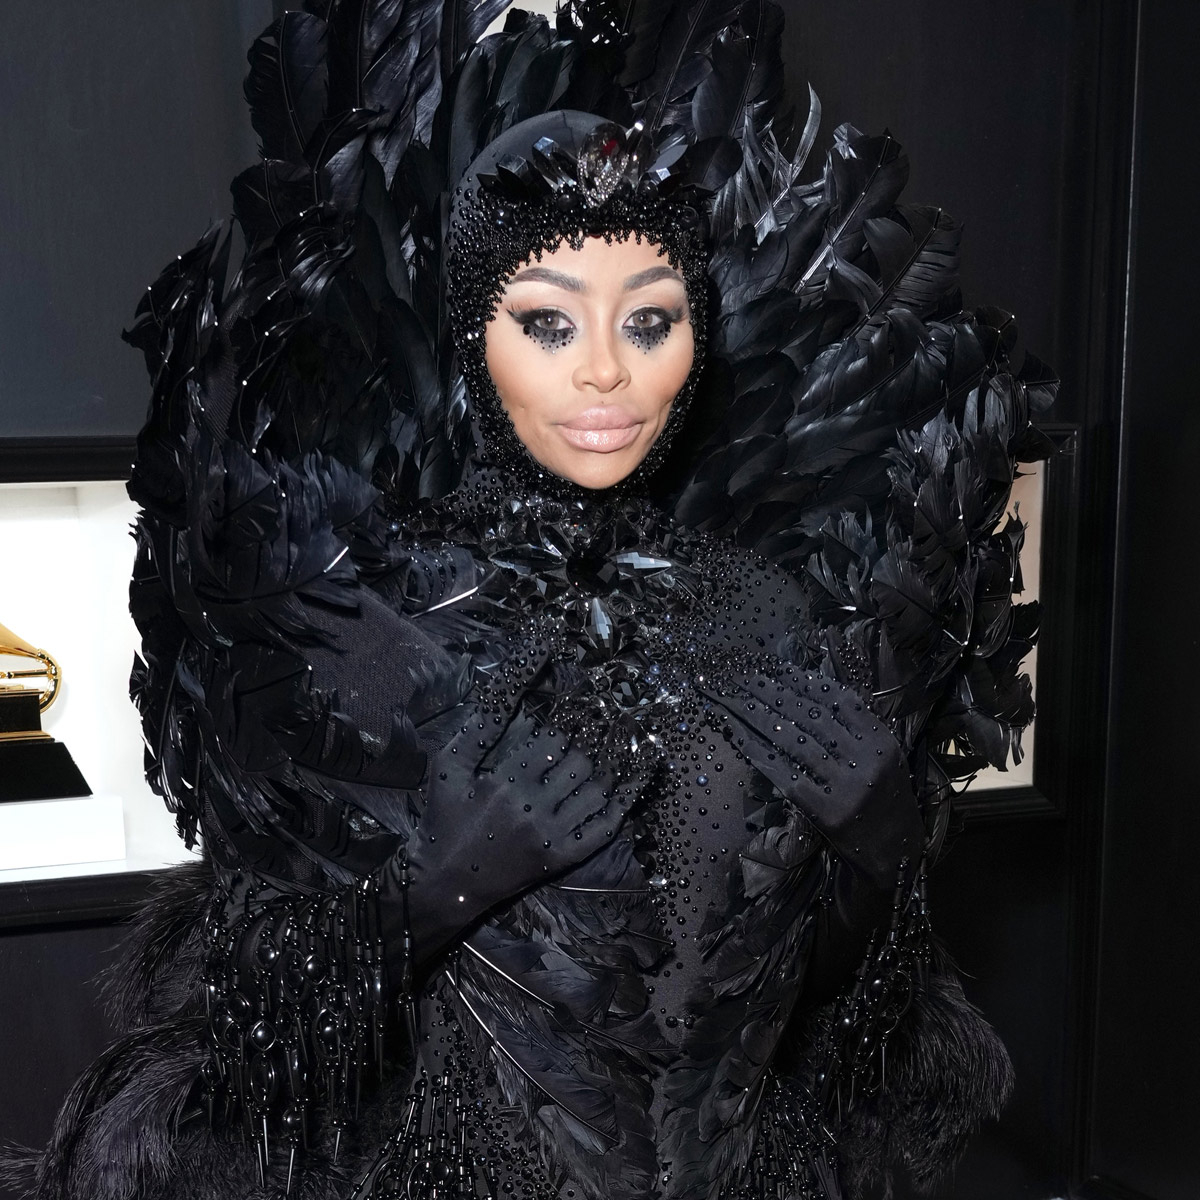 Blac Chyna Goes Pantsless in Extravagant Gothic Look at 2023 Grammys ...